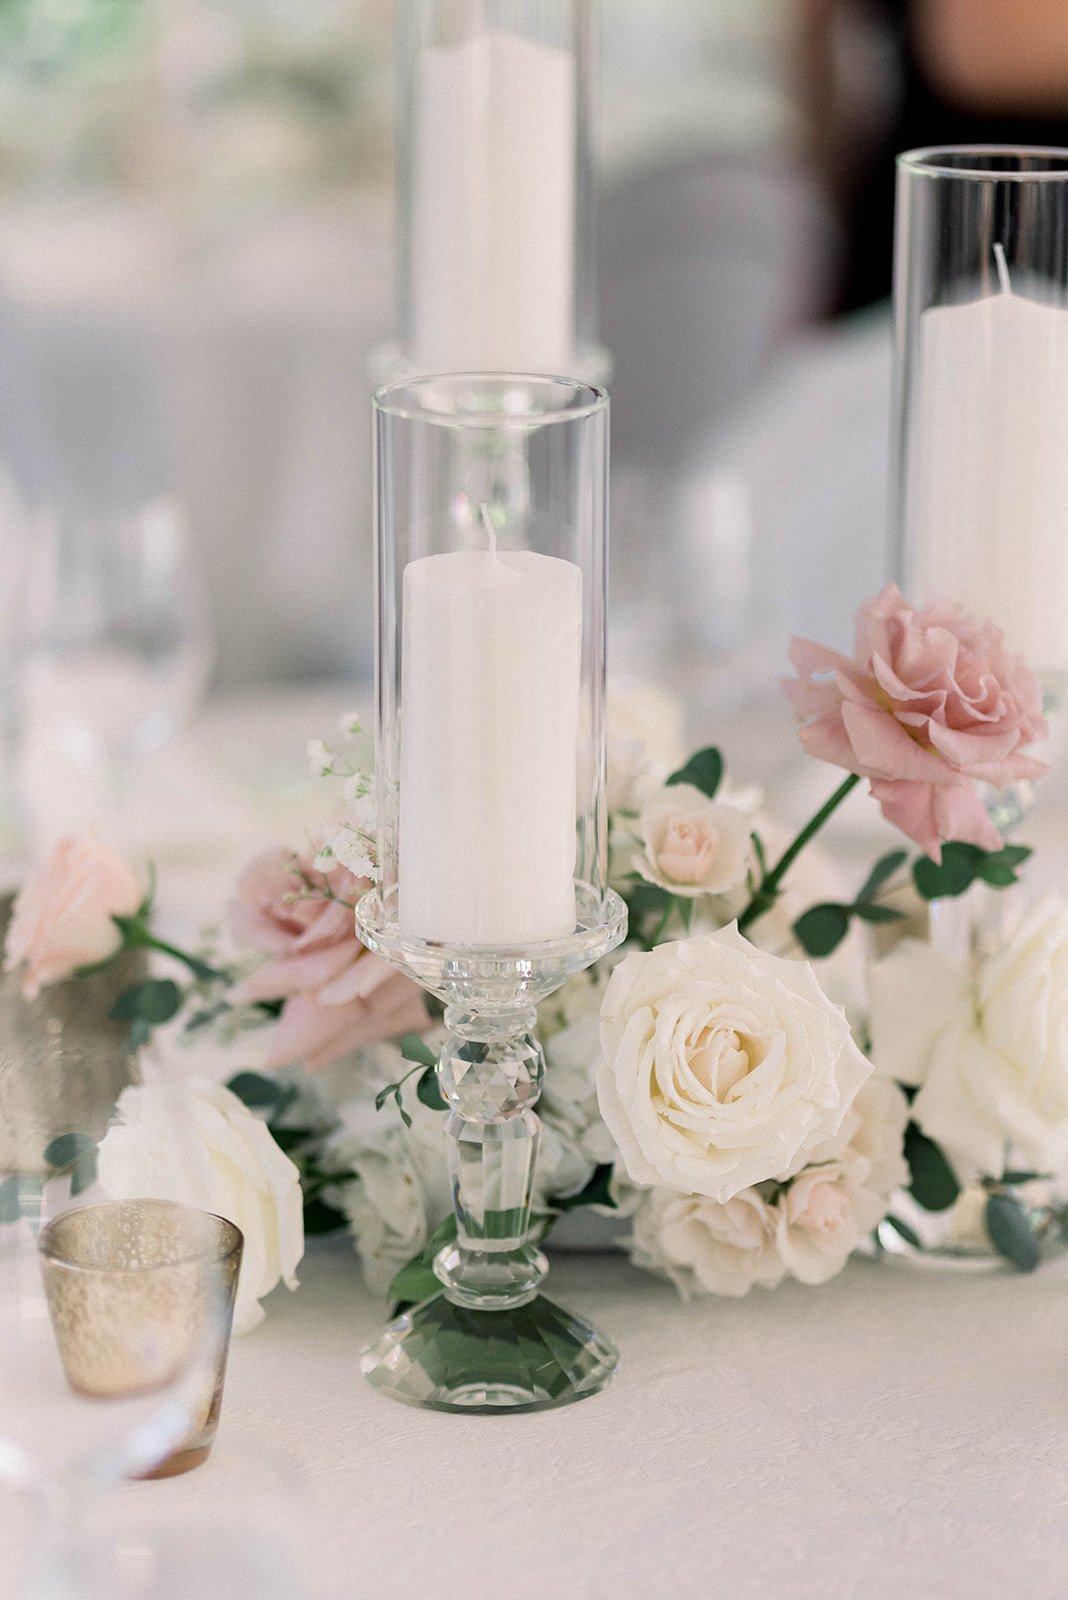 White pillar candles cozy up to pink and white flowers at Hart Hart wedding reception 